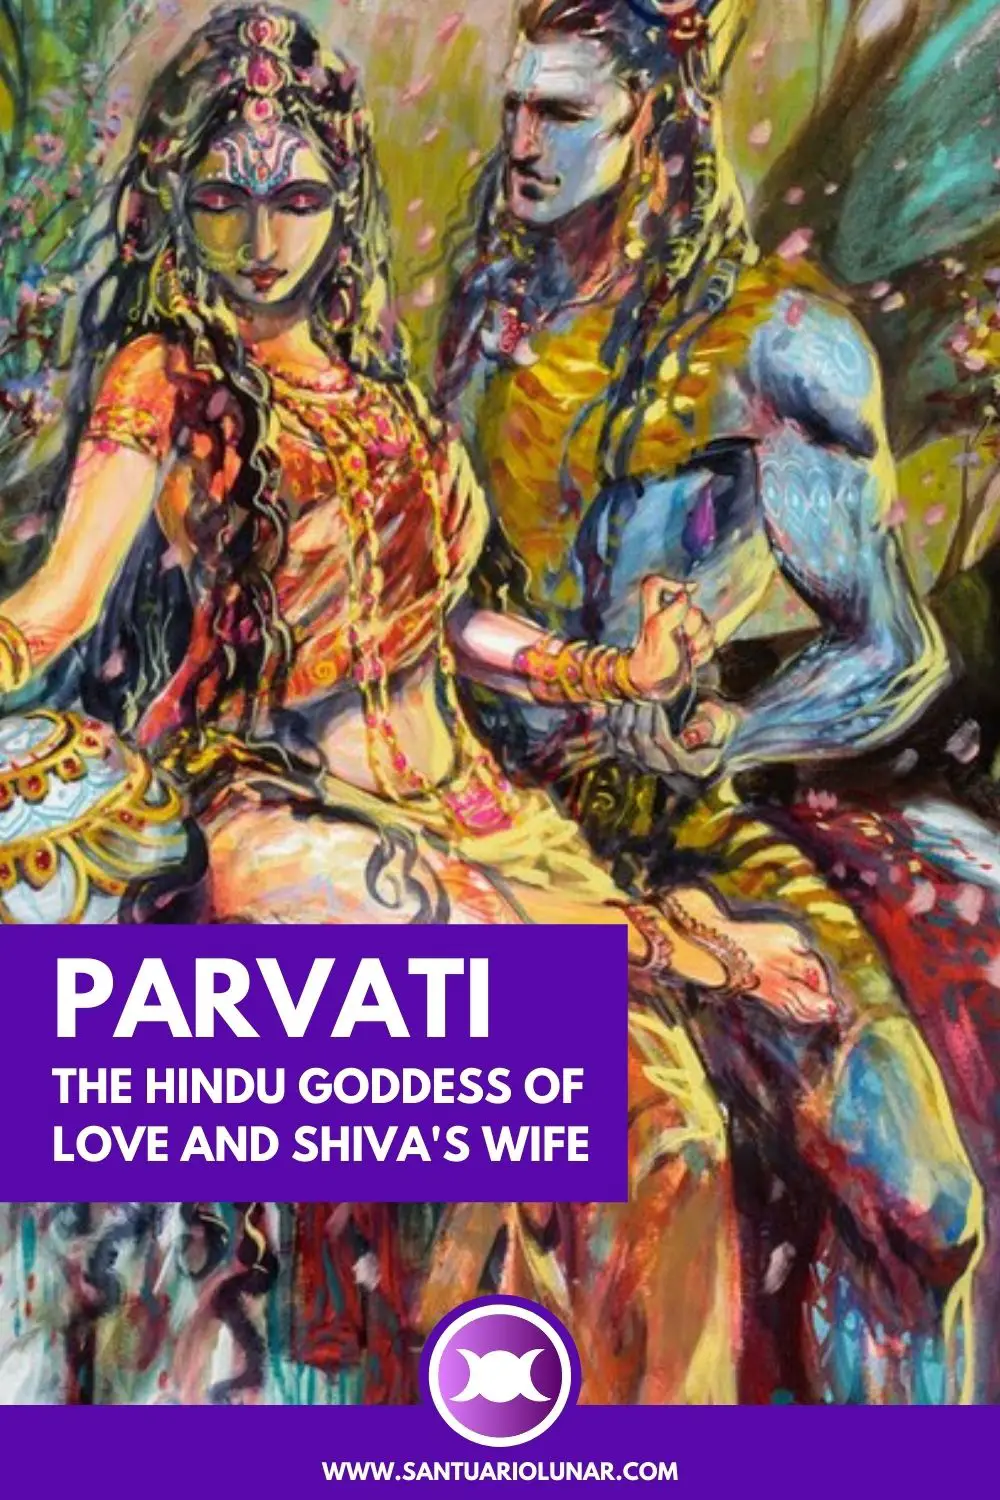 A Pin for Pinterest with Abhishek's painting of Parvati and Shiva